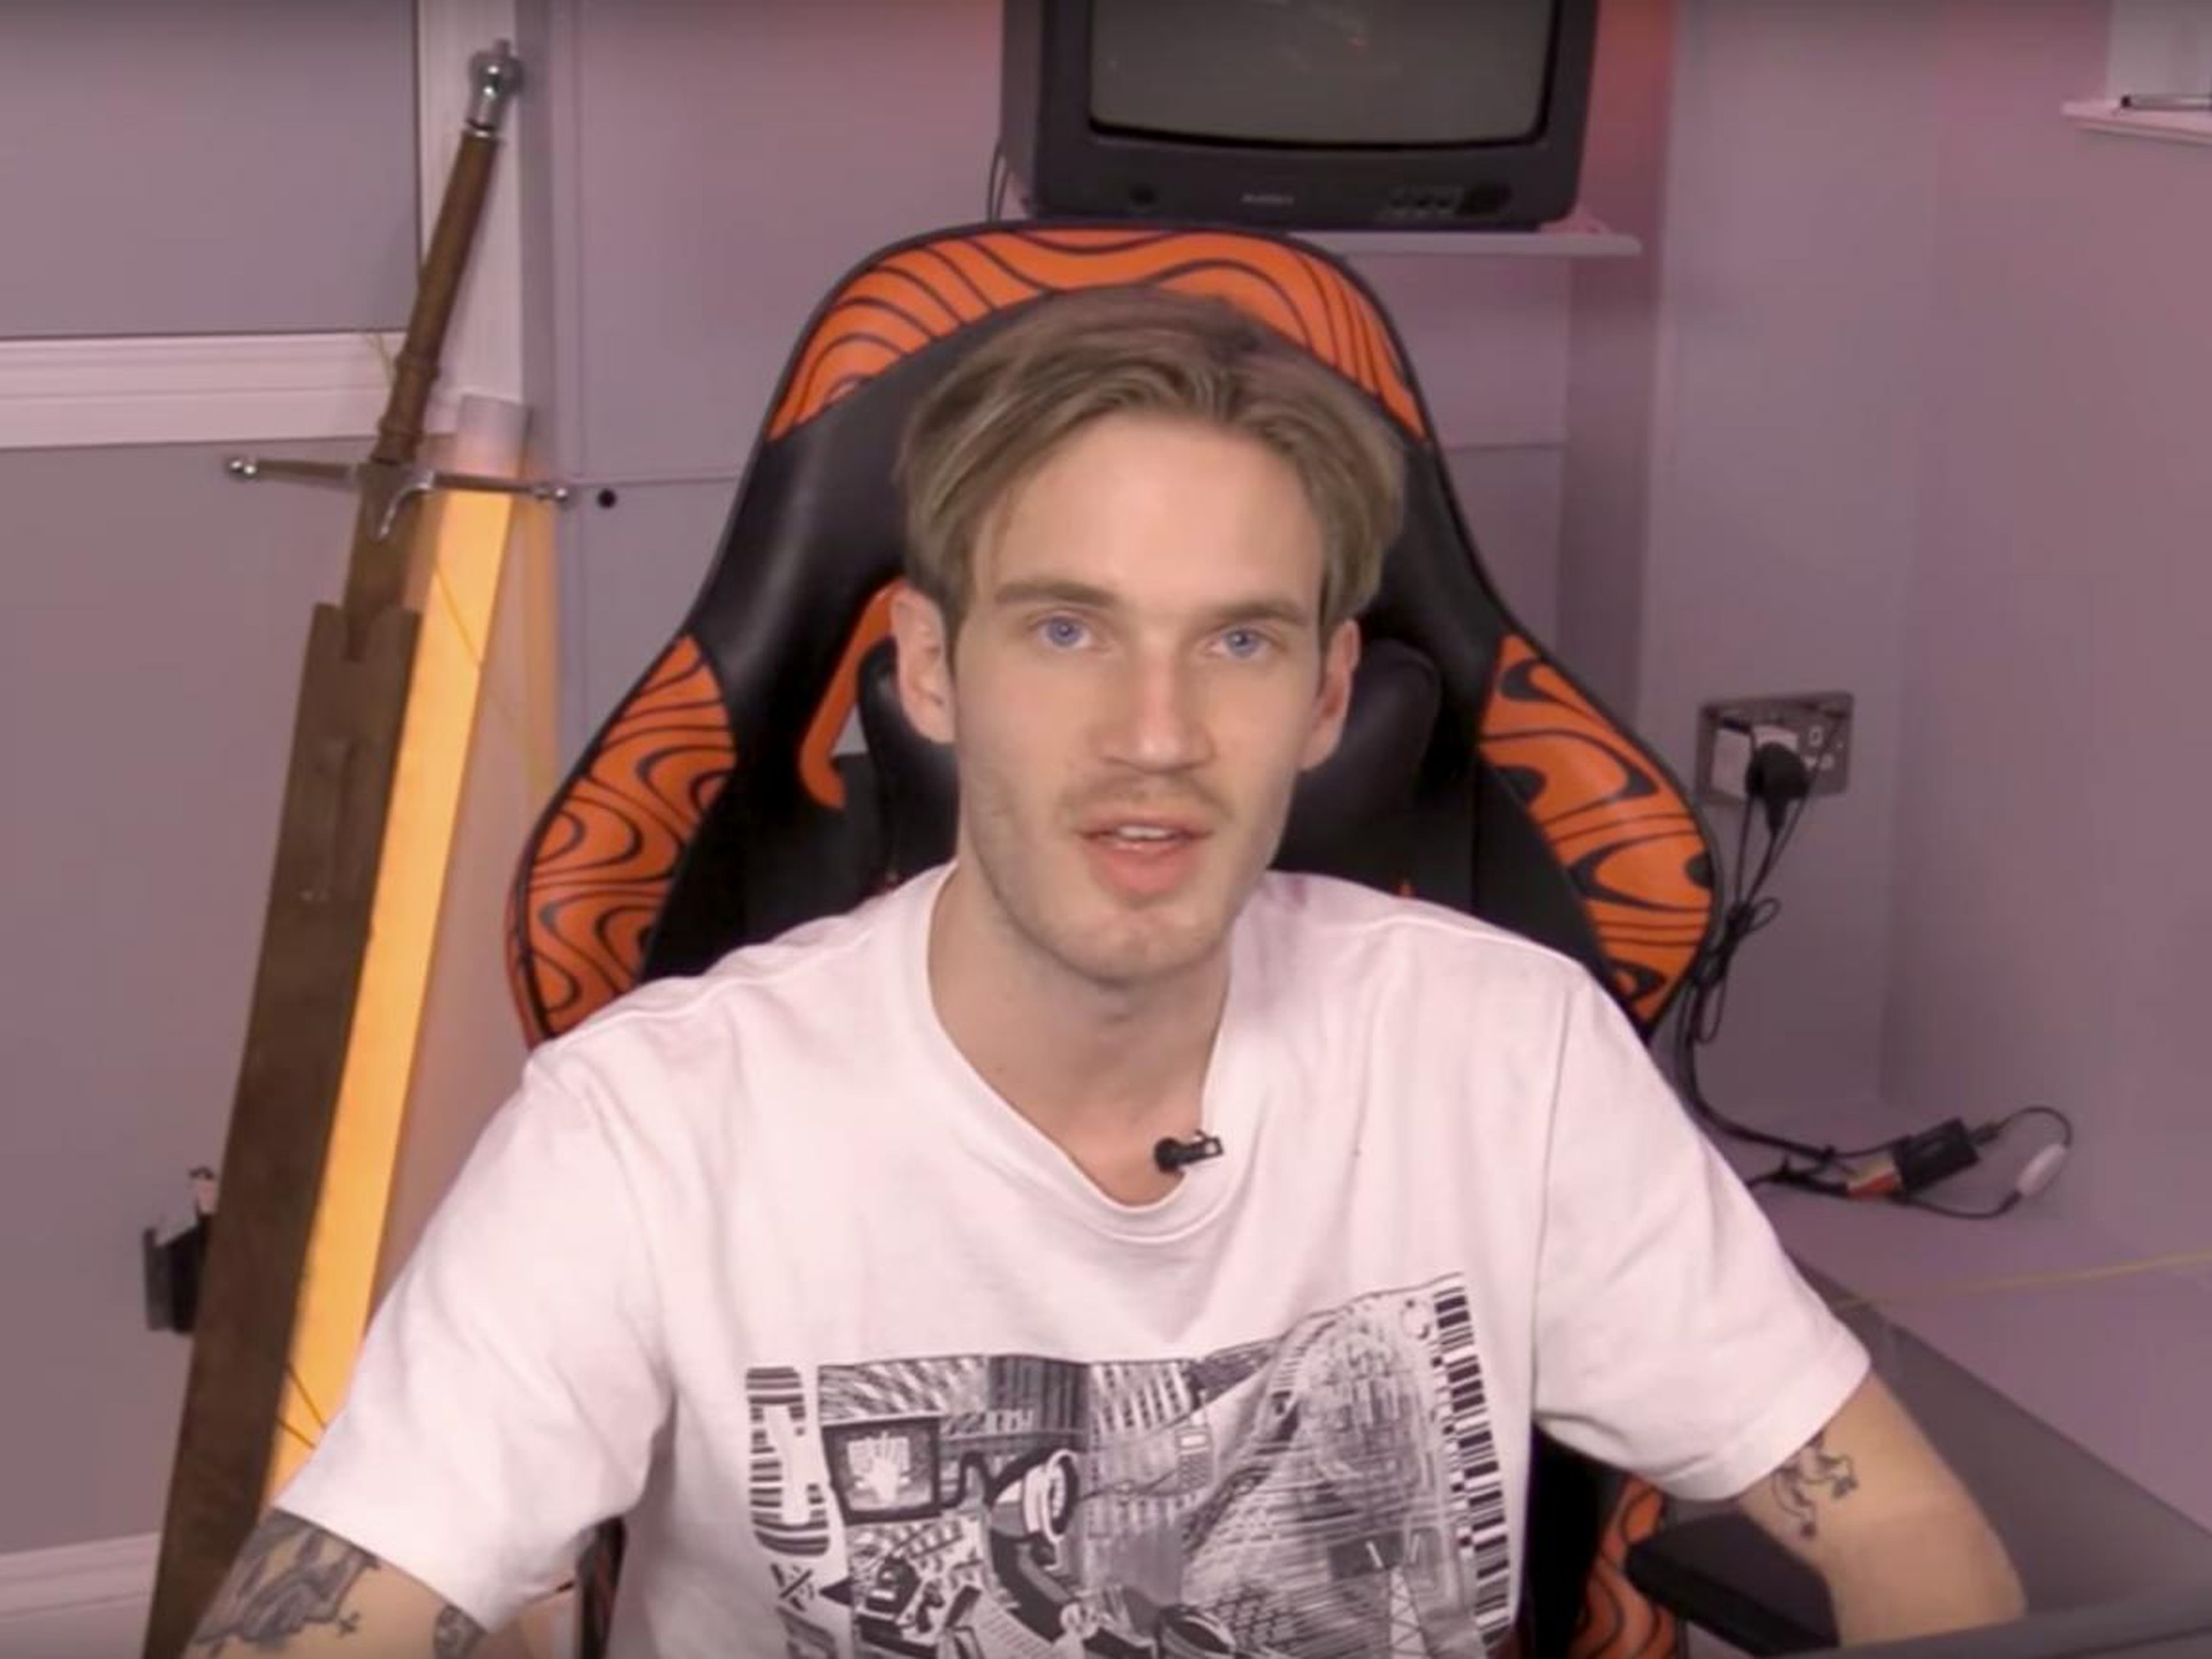 The career of PewDiePie, the controversial 30-year-old YouTuber who deleted his Twitter and will take a break from YouTube in 2020